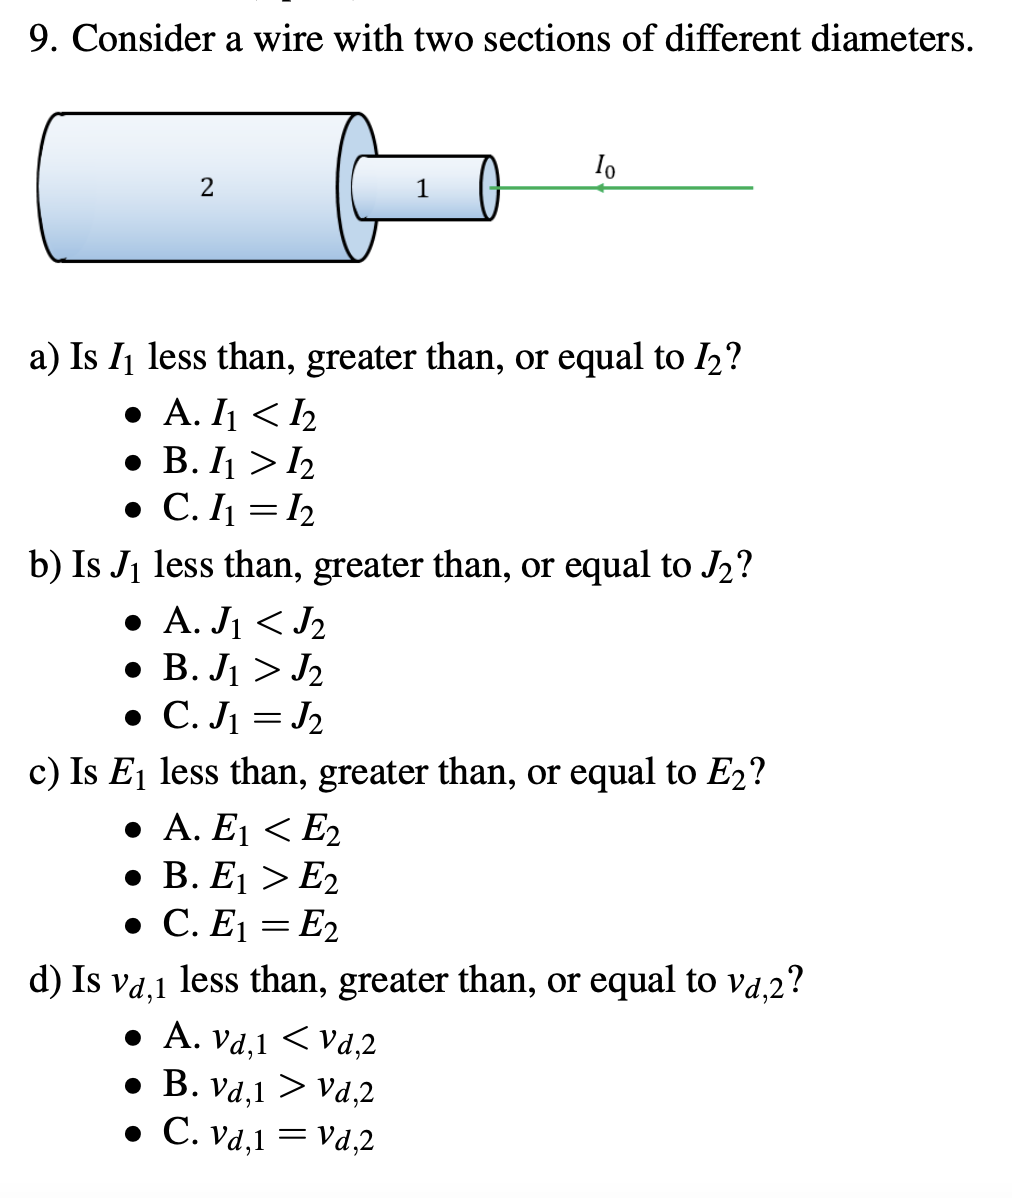 9. Consider a wire with two sections of different diameters.
a) Is I1 less than, greater than, or equal to I2?
• A. I < 2
• B. I1 > 2
• C. I1 = 12
b) Is J1 less than, greater than, or equal to J2?
• A. Jj < J2
• B. Jj > J2
• C. Jį = J2
c) Is Ej less than, greater than, or equal to E2?
. А. Ej < E2
. В. Еi > Е2
• C. Ej = E2
d) Is va,1 less than, greater than, or equal to va,2?
. А. Va,1 < va,2
• B. vd,1 > Vd,2
• C. vd,1 = Vd,2
